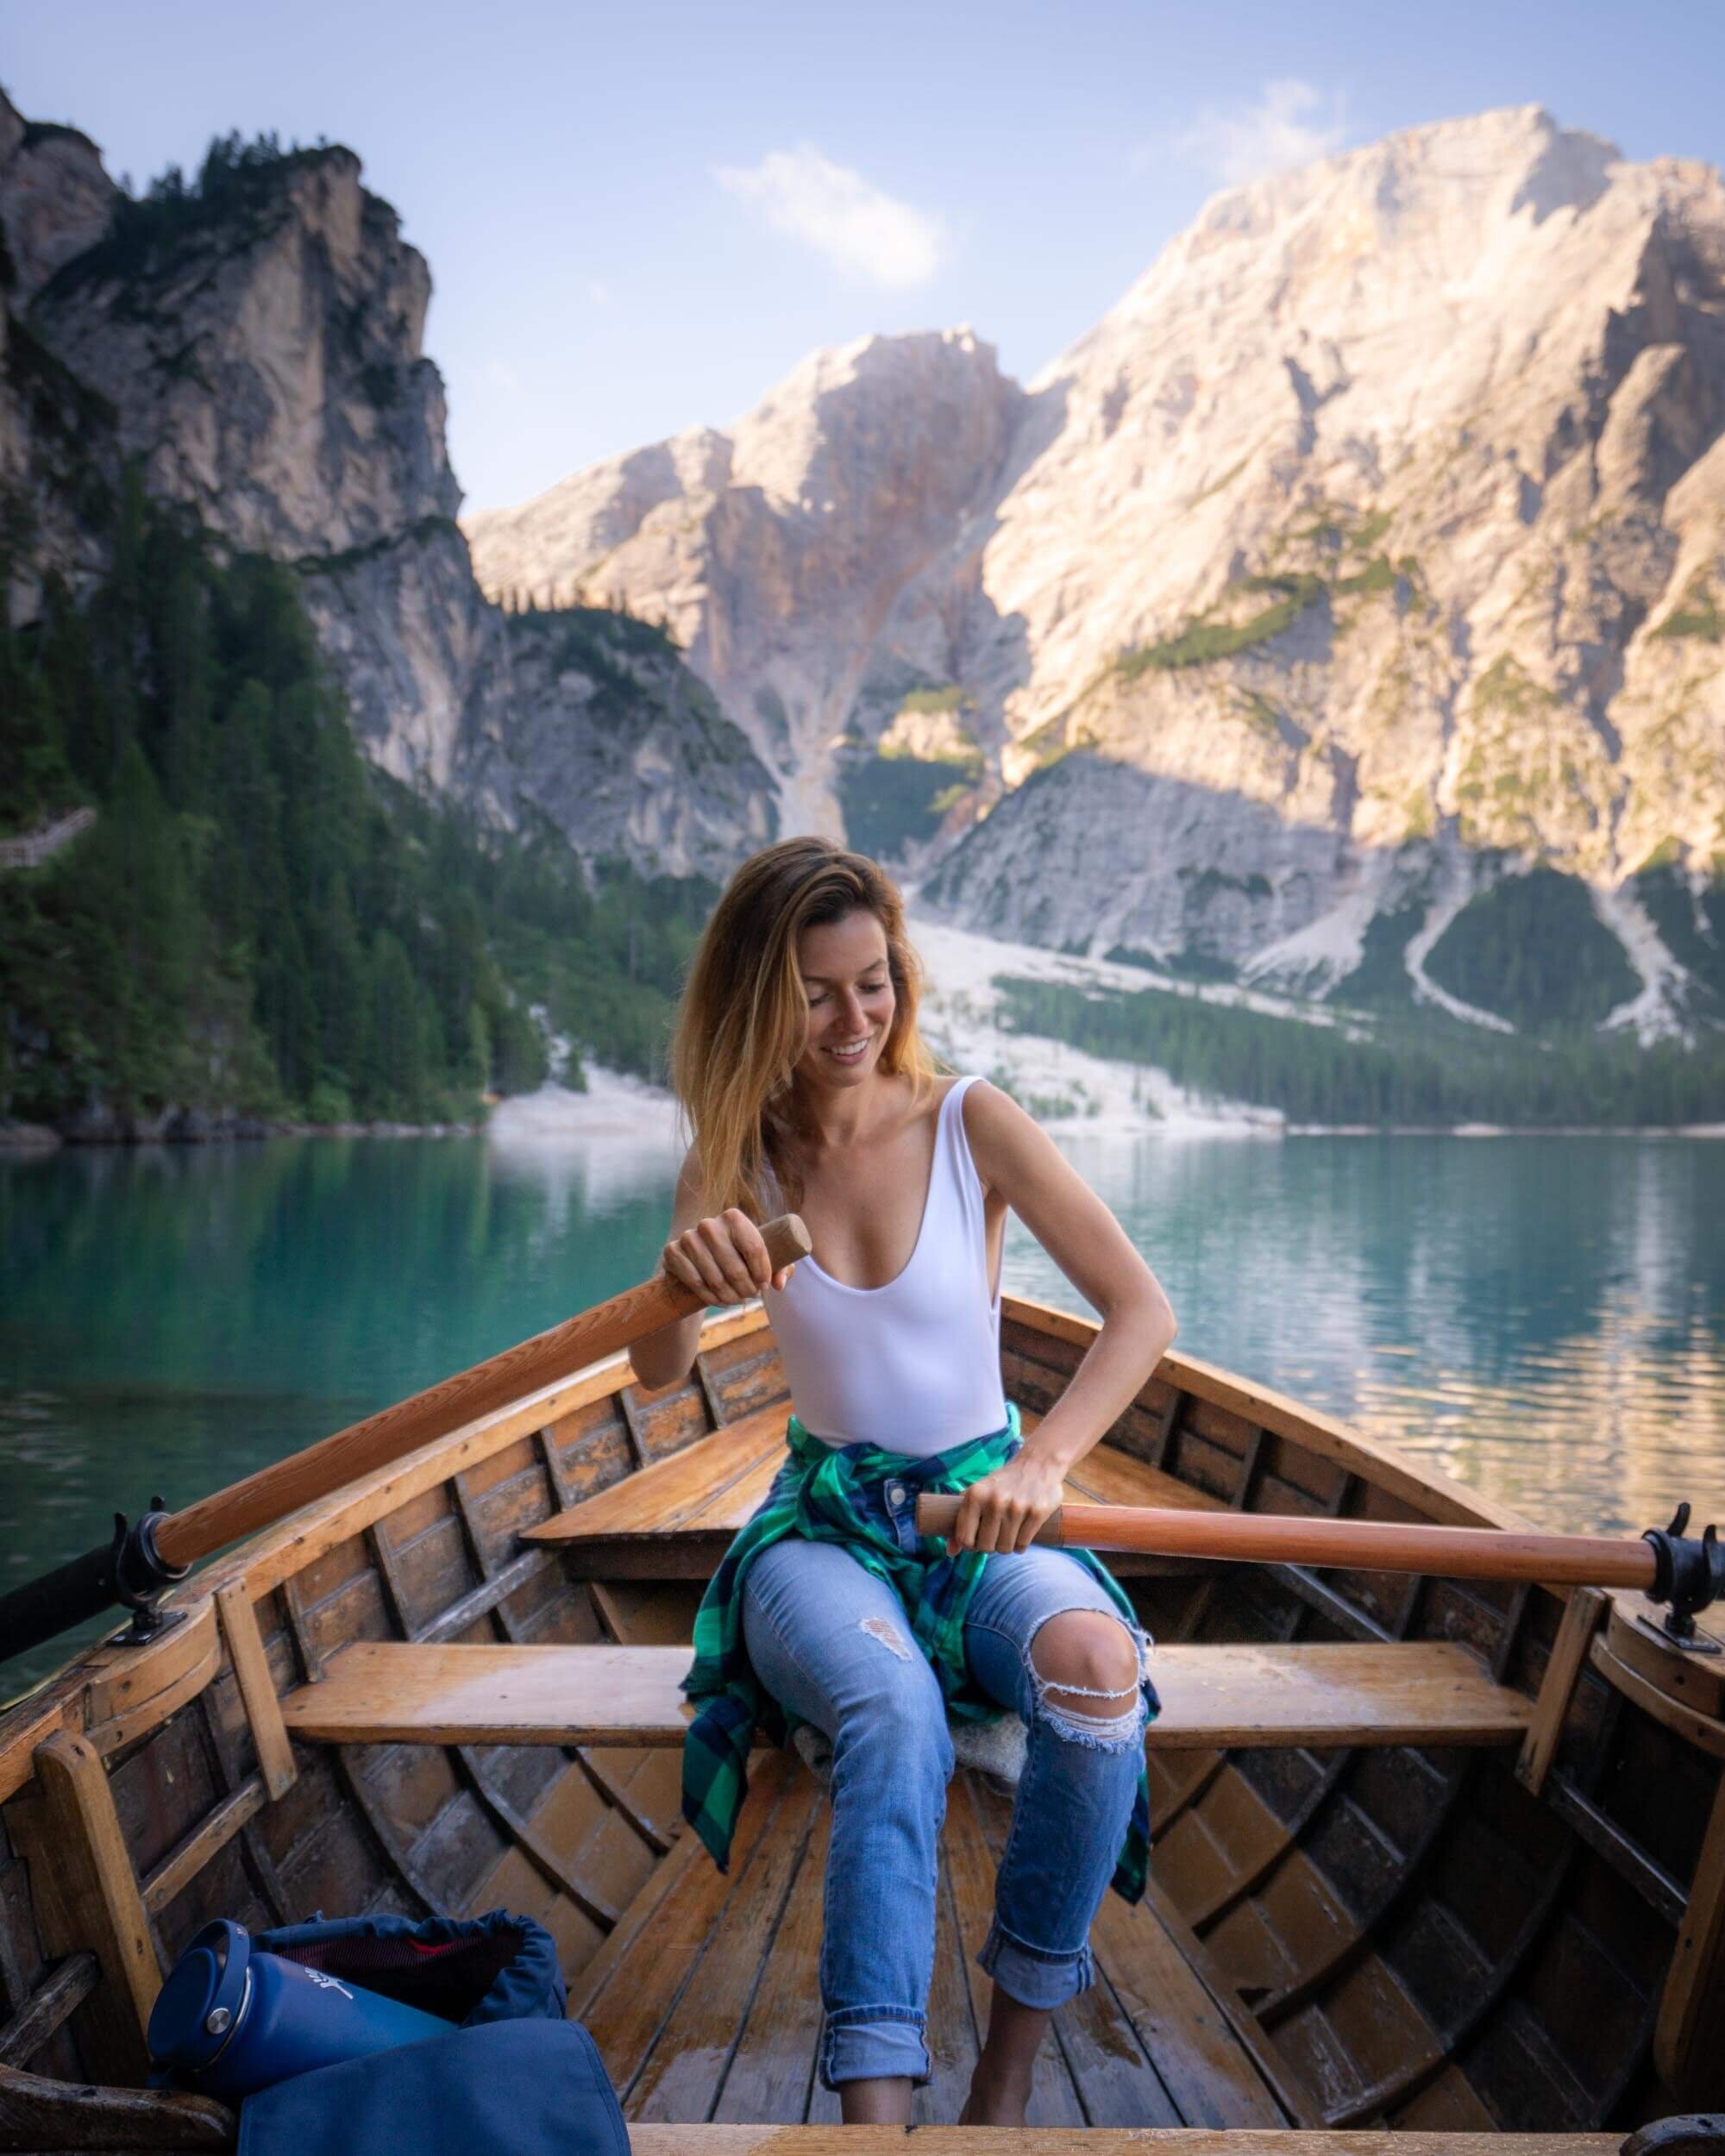 Don’t miss the opportunity to take a row boat out on  Lago di Braies!